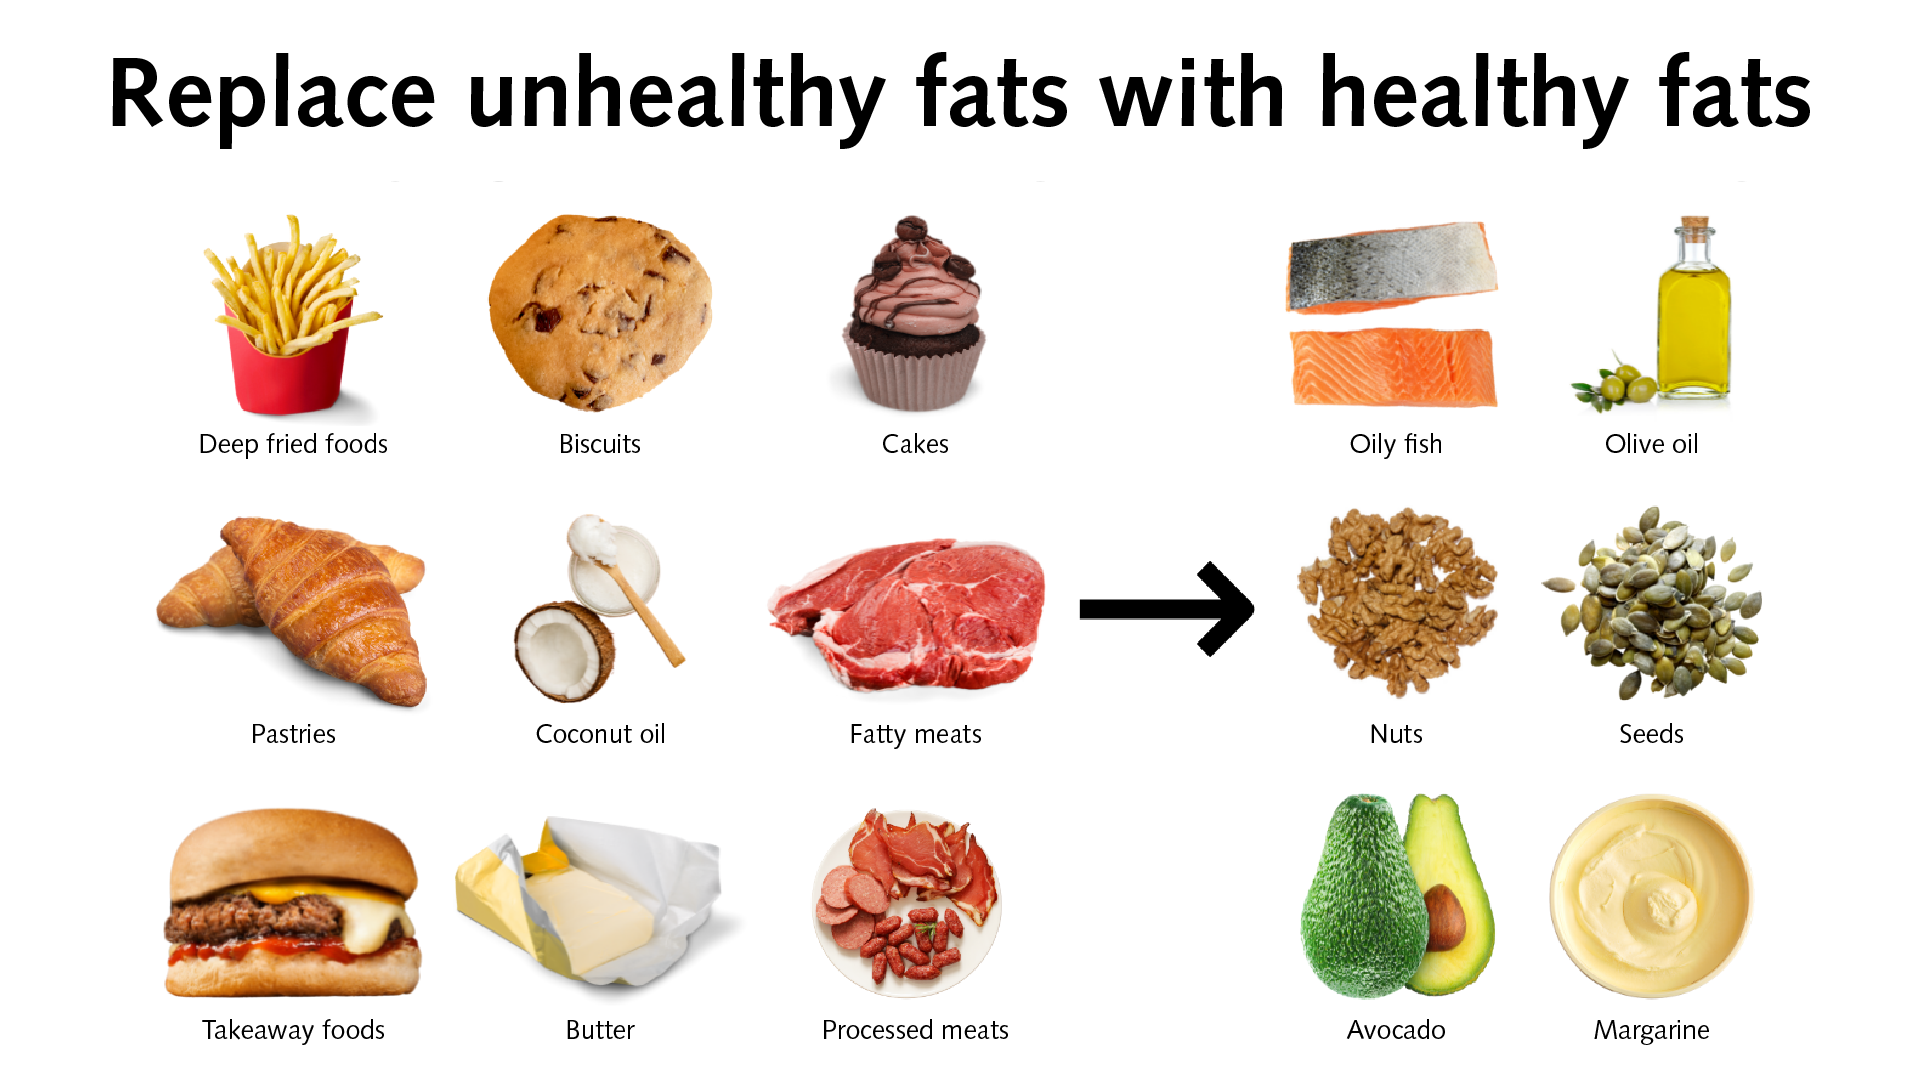 Foods with unhealthy fats include Deep fried foods, Biscuits, Cakes, Pastries, Coconut oil, Fatty meats, Takeaway foods, Butter, Processed meats. Replace these with food with healthy fats such as Oily fish, Olive oil, Nuts, Seeds, Avocado and Margarine.